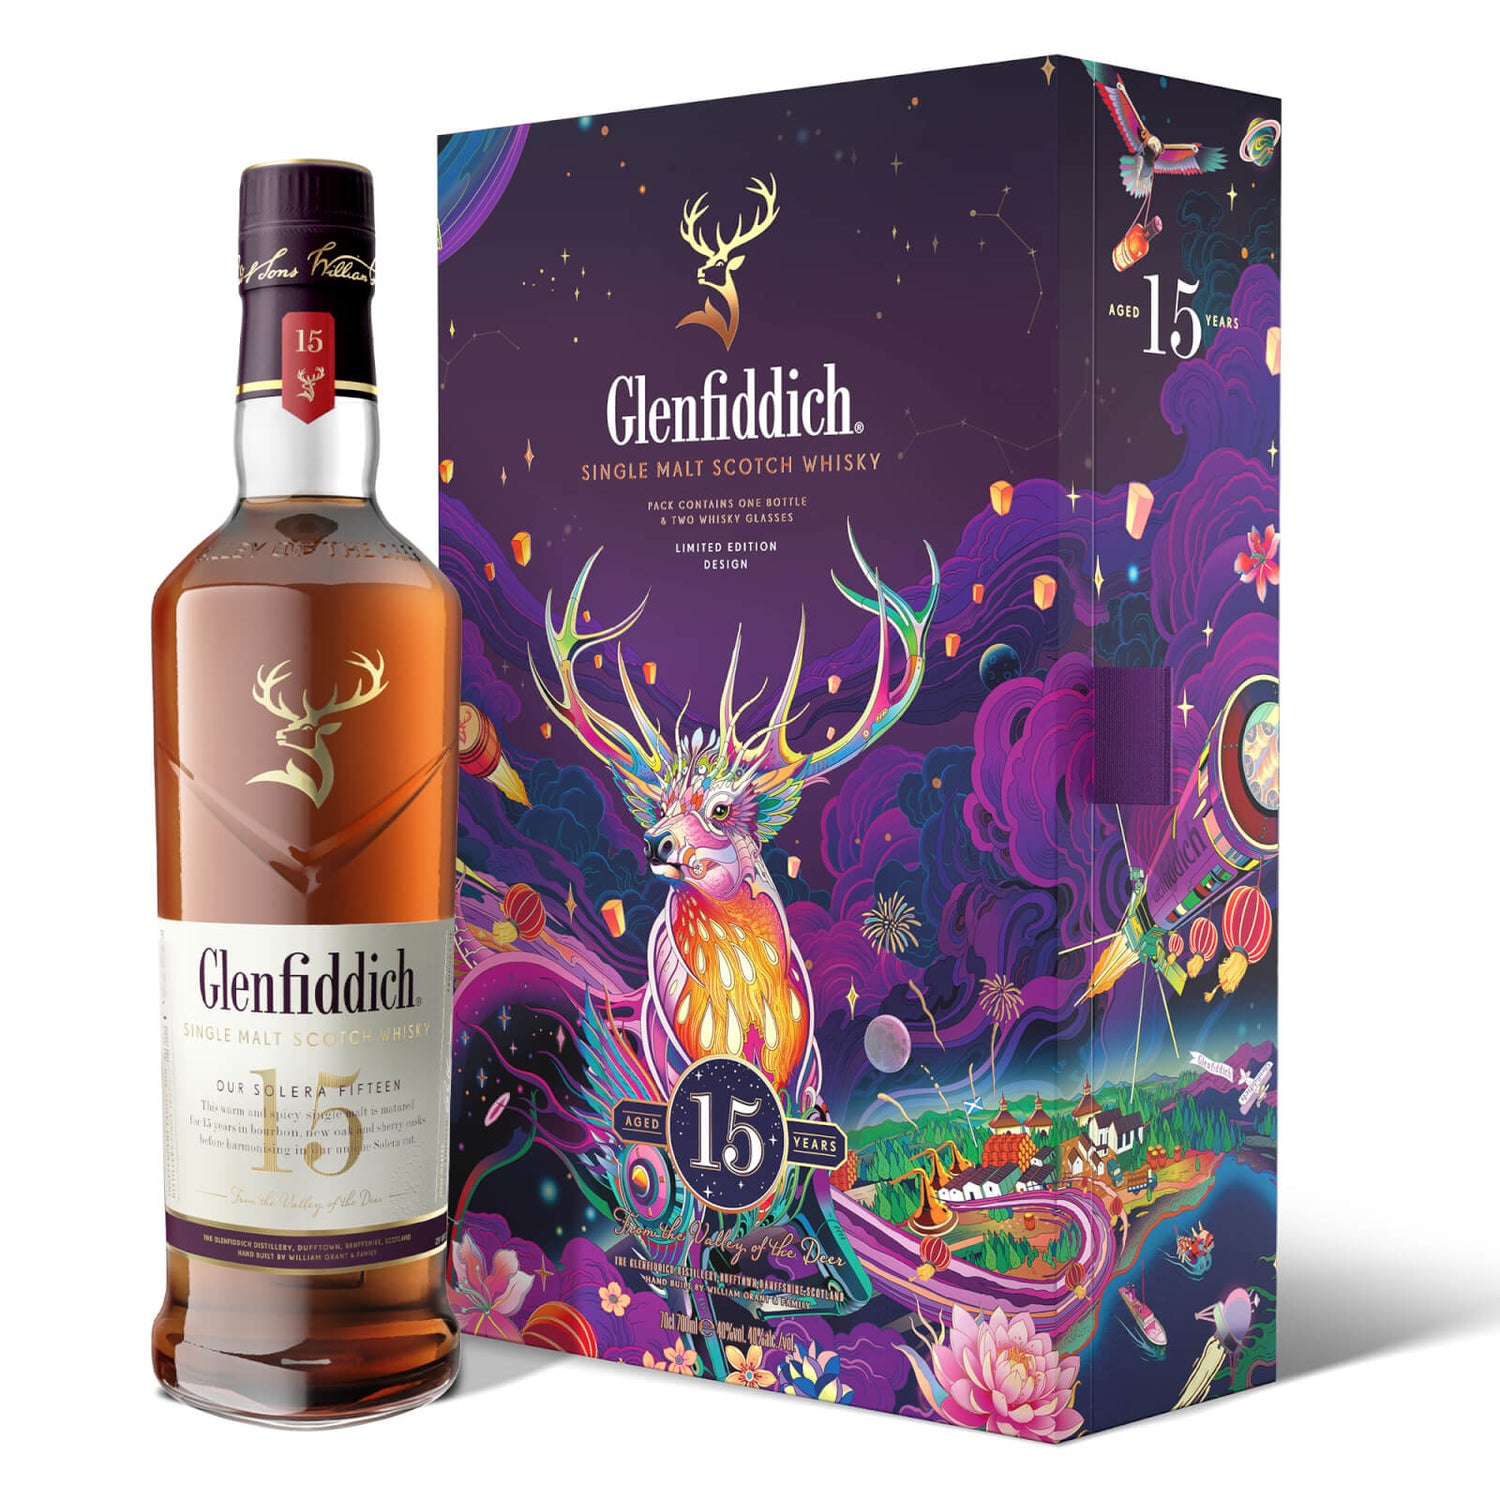 Glenfiddich 15 Year Old Single Malt Scotch Whisky, 2022 Chinese New Year Limited Edition Gift Bottle & Glass Set, 70cl